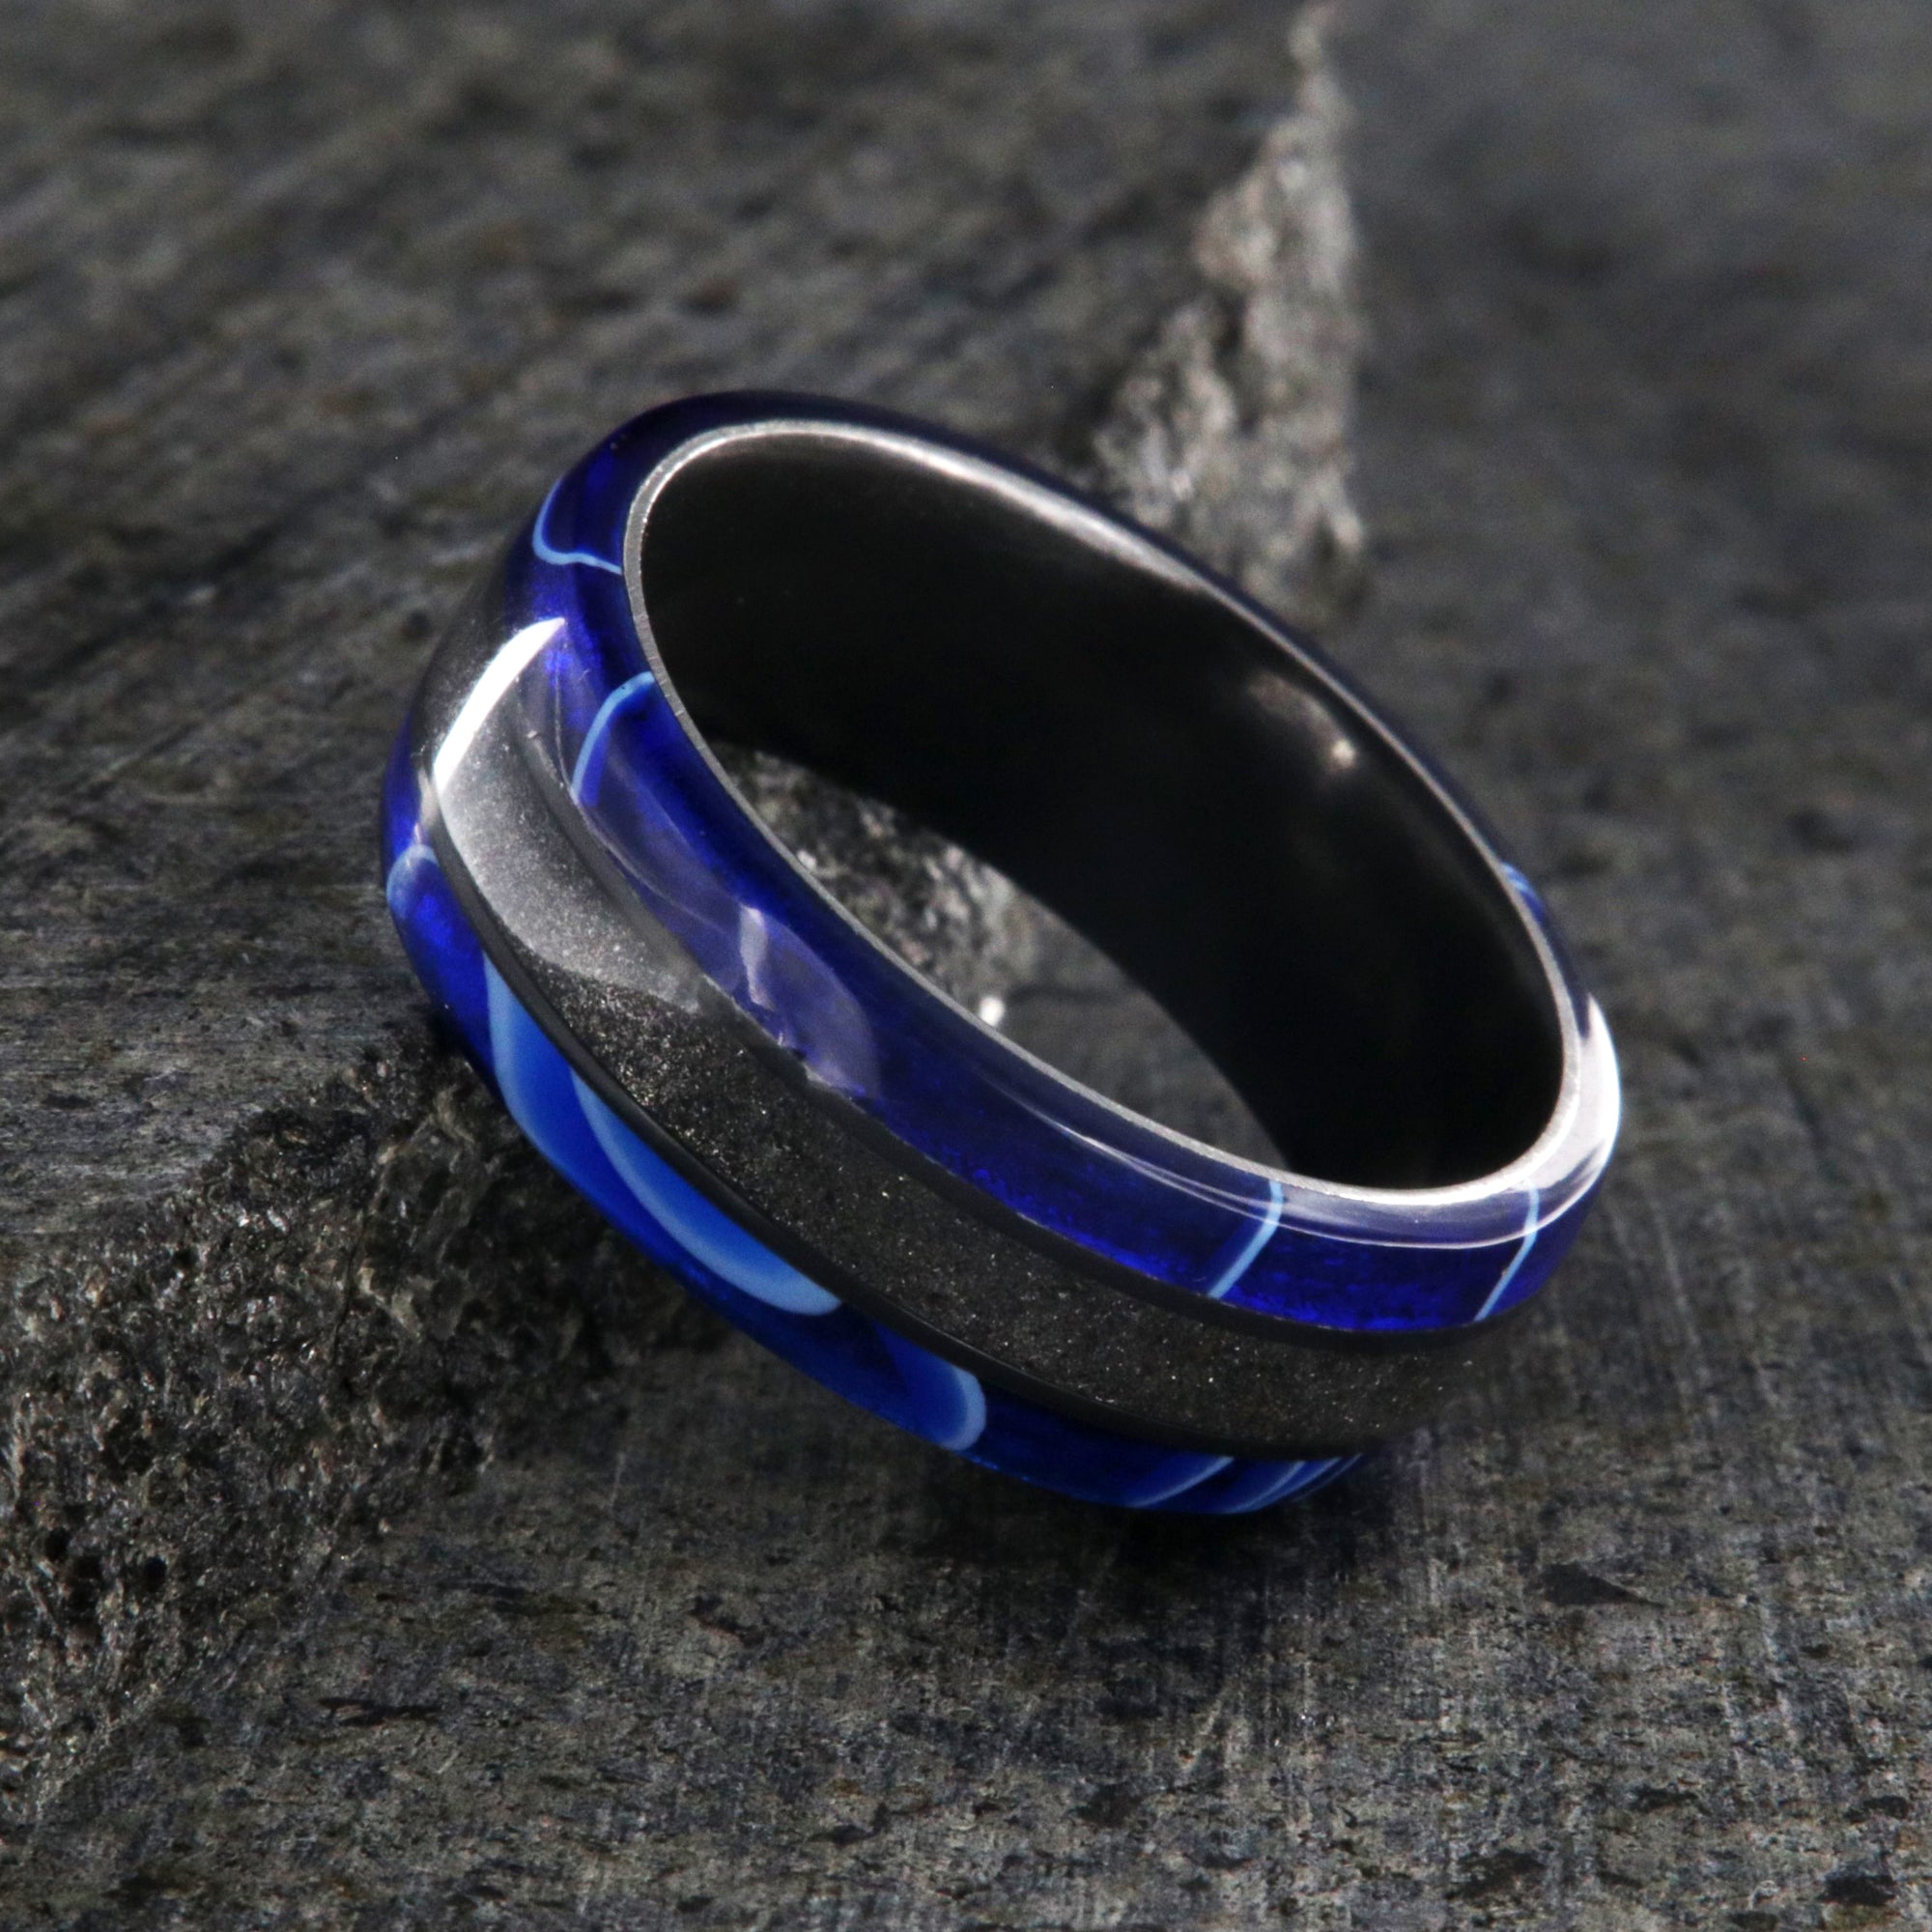 7mm wide swirled blue acrylic ring with black stardust center inlay and black zirconium sleeve